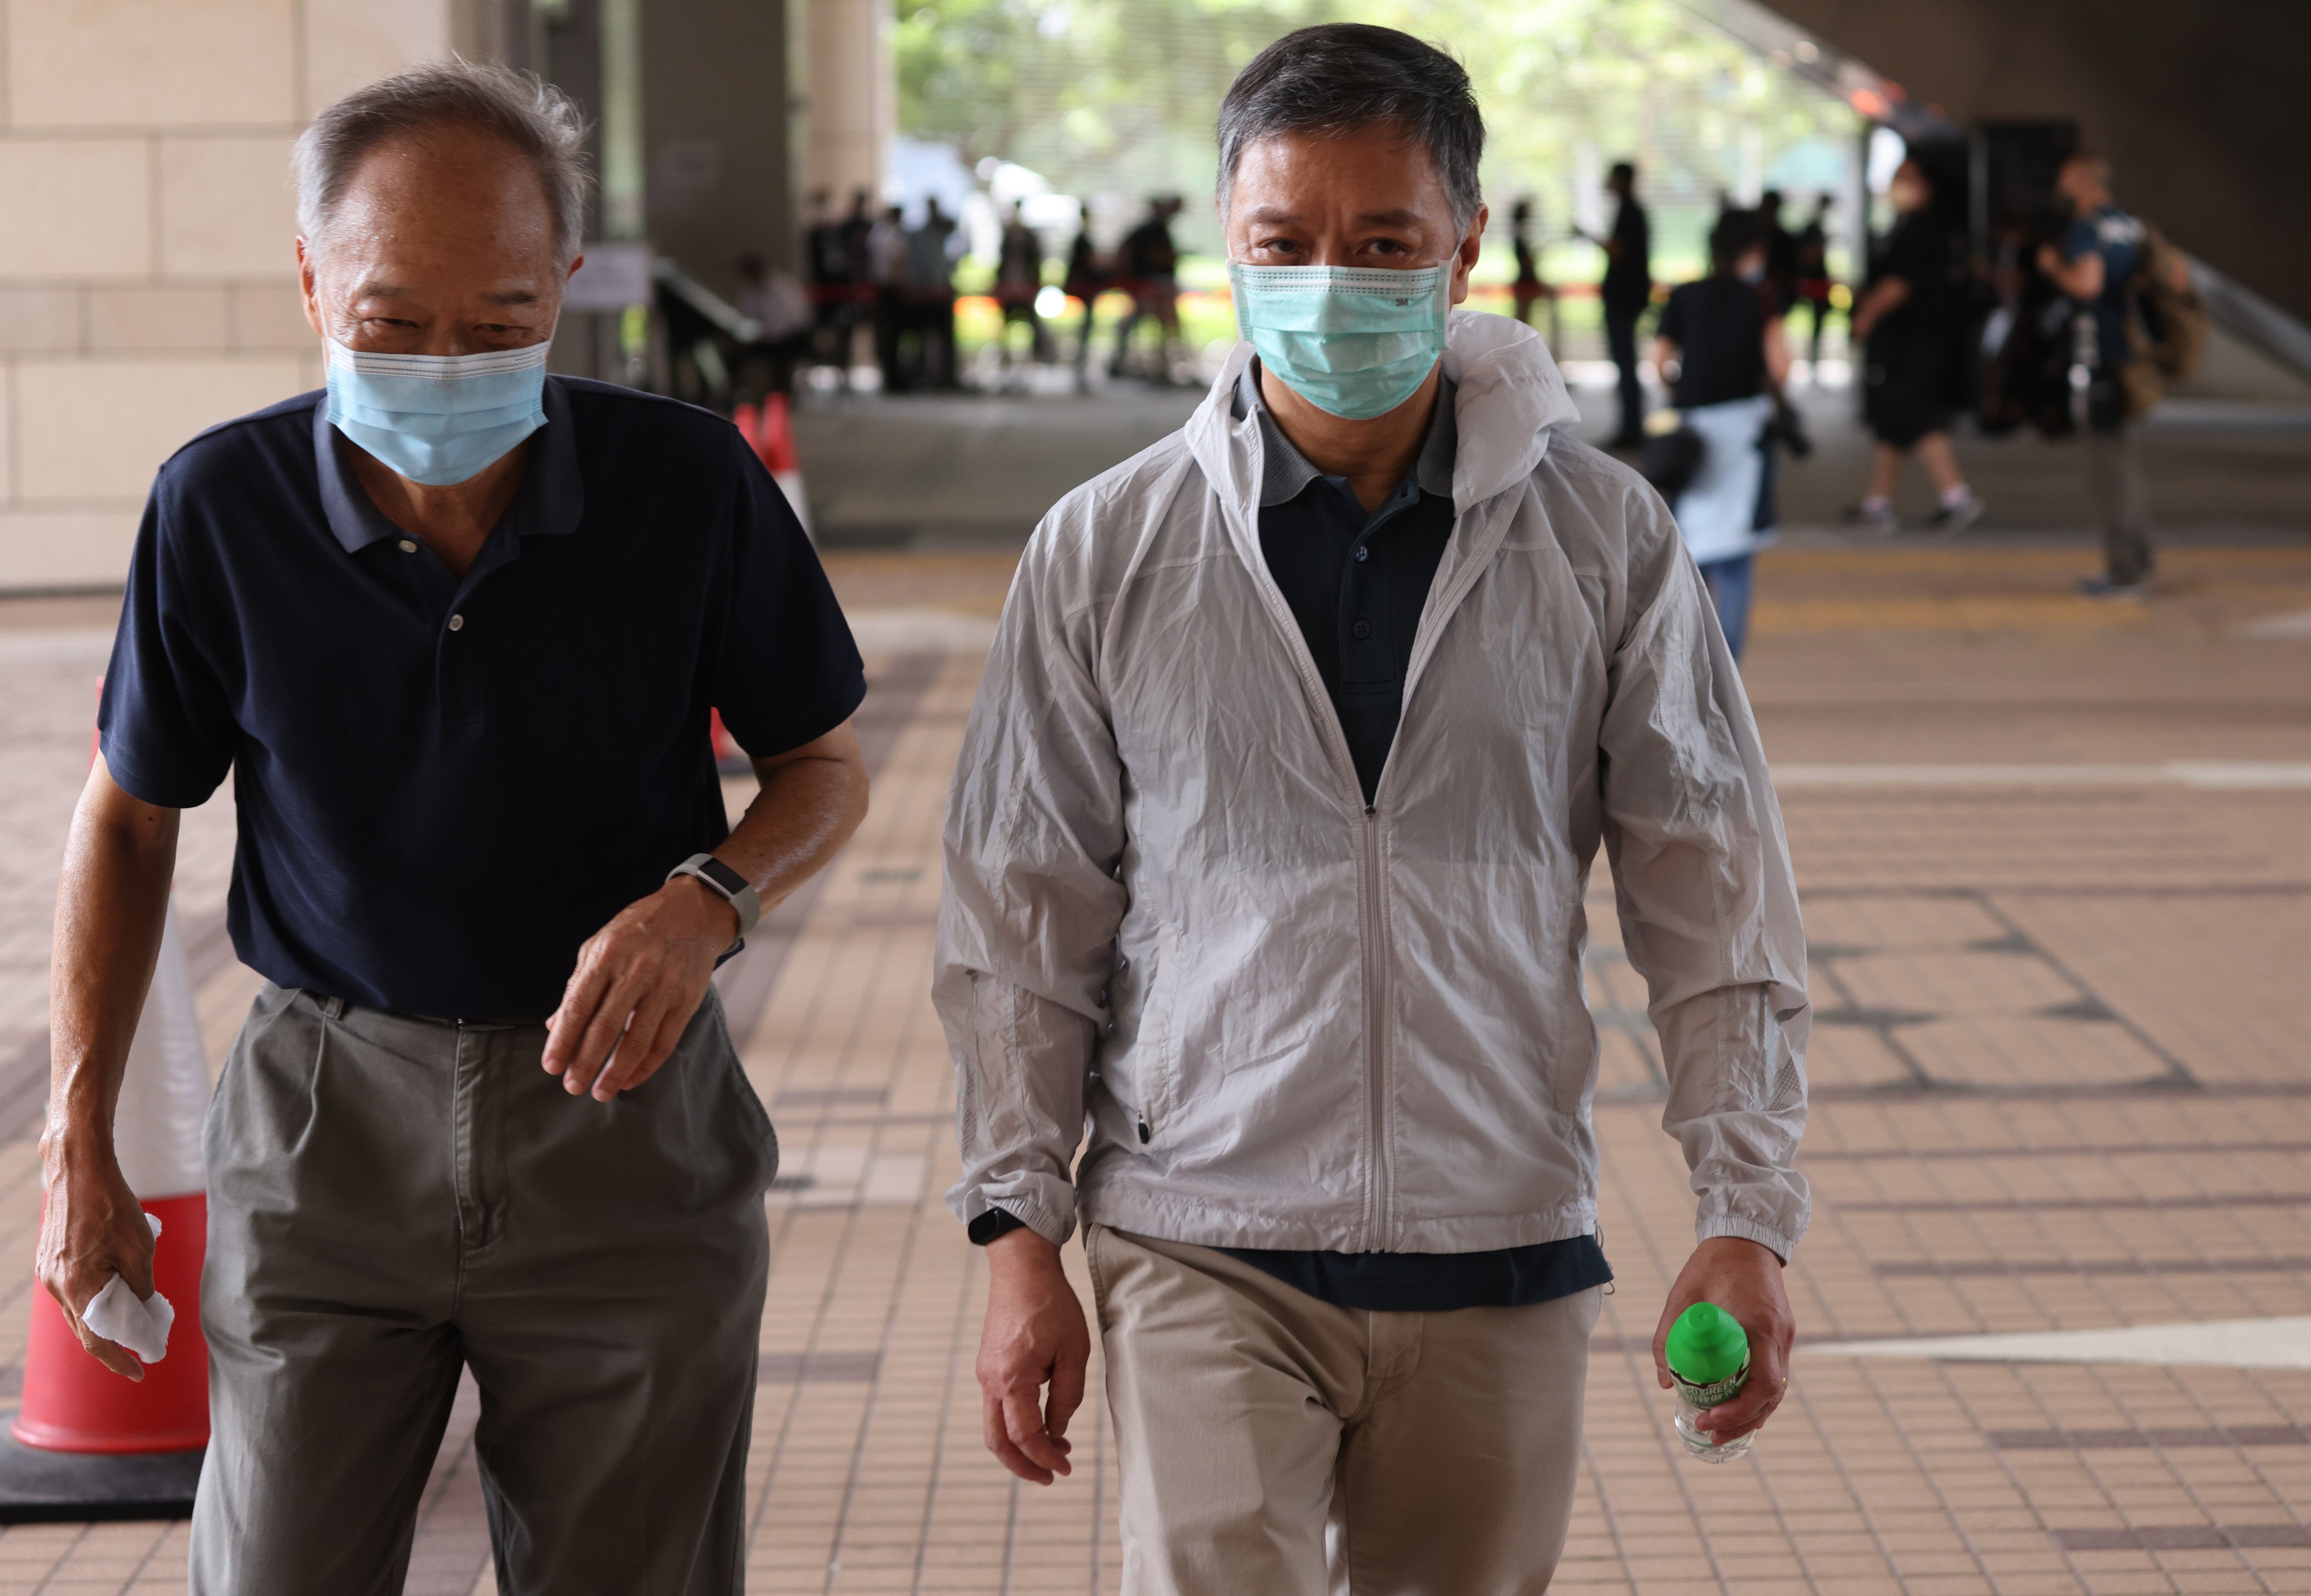 Apple Daily chief operating officer Chow Tat-kuen (white jacket) arrives at West Kowloon Magistrates’ Court at an earlier sitting. Photo: May Tse